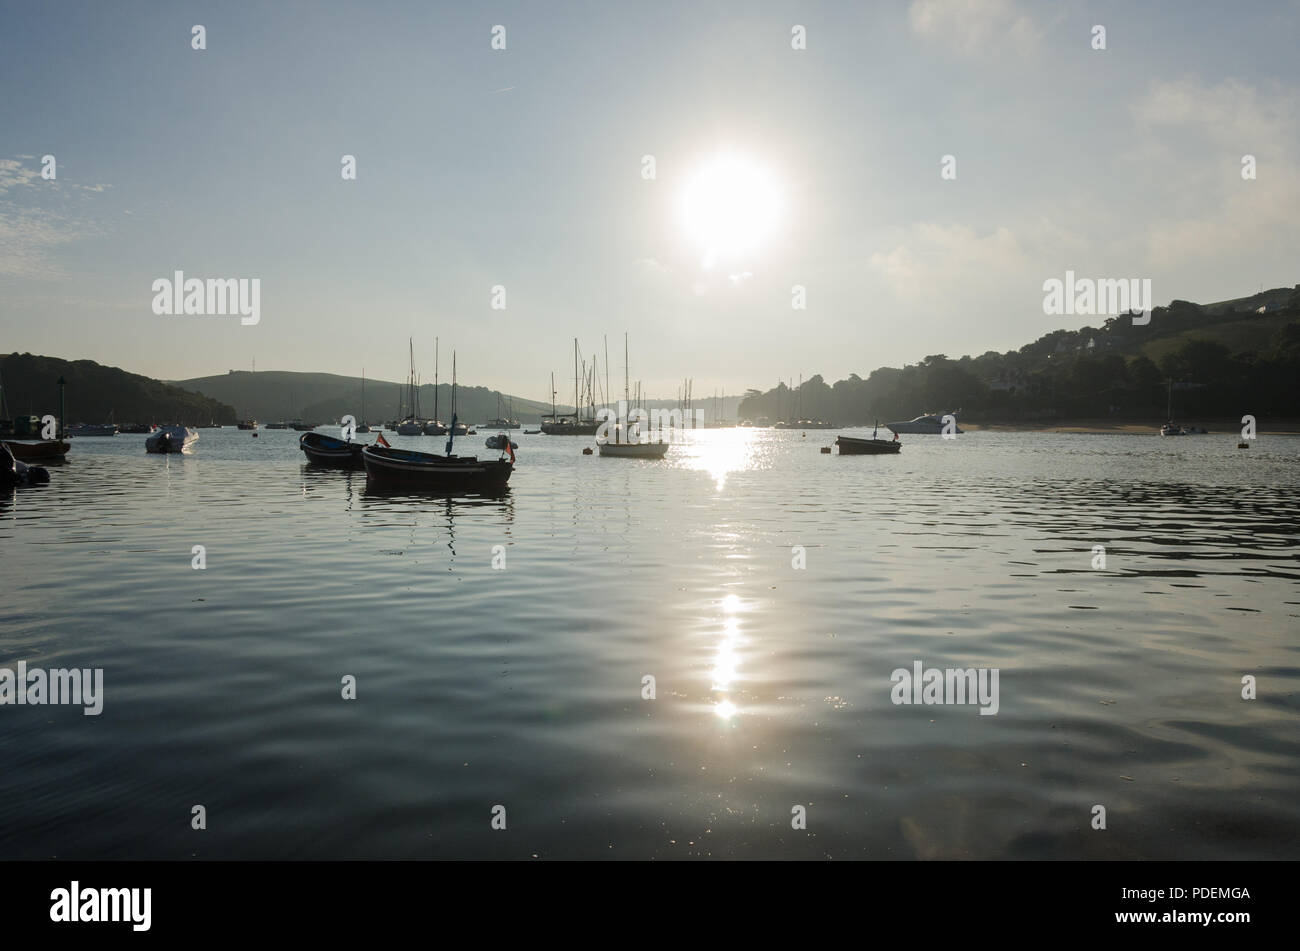 Early morning sunrise over boats moored in the estuary in the pretty sailing town of Salcombe in the South Hams,Devon,England Stock Photo